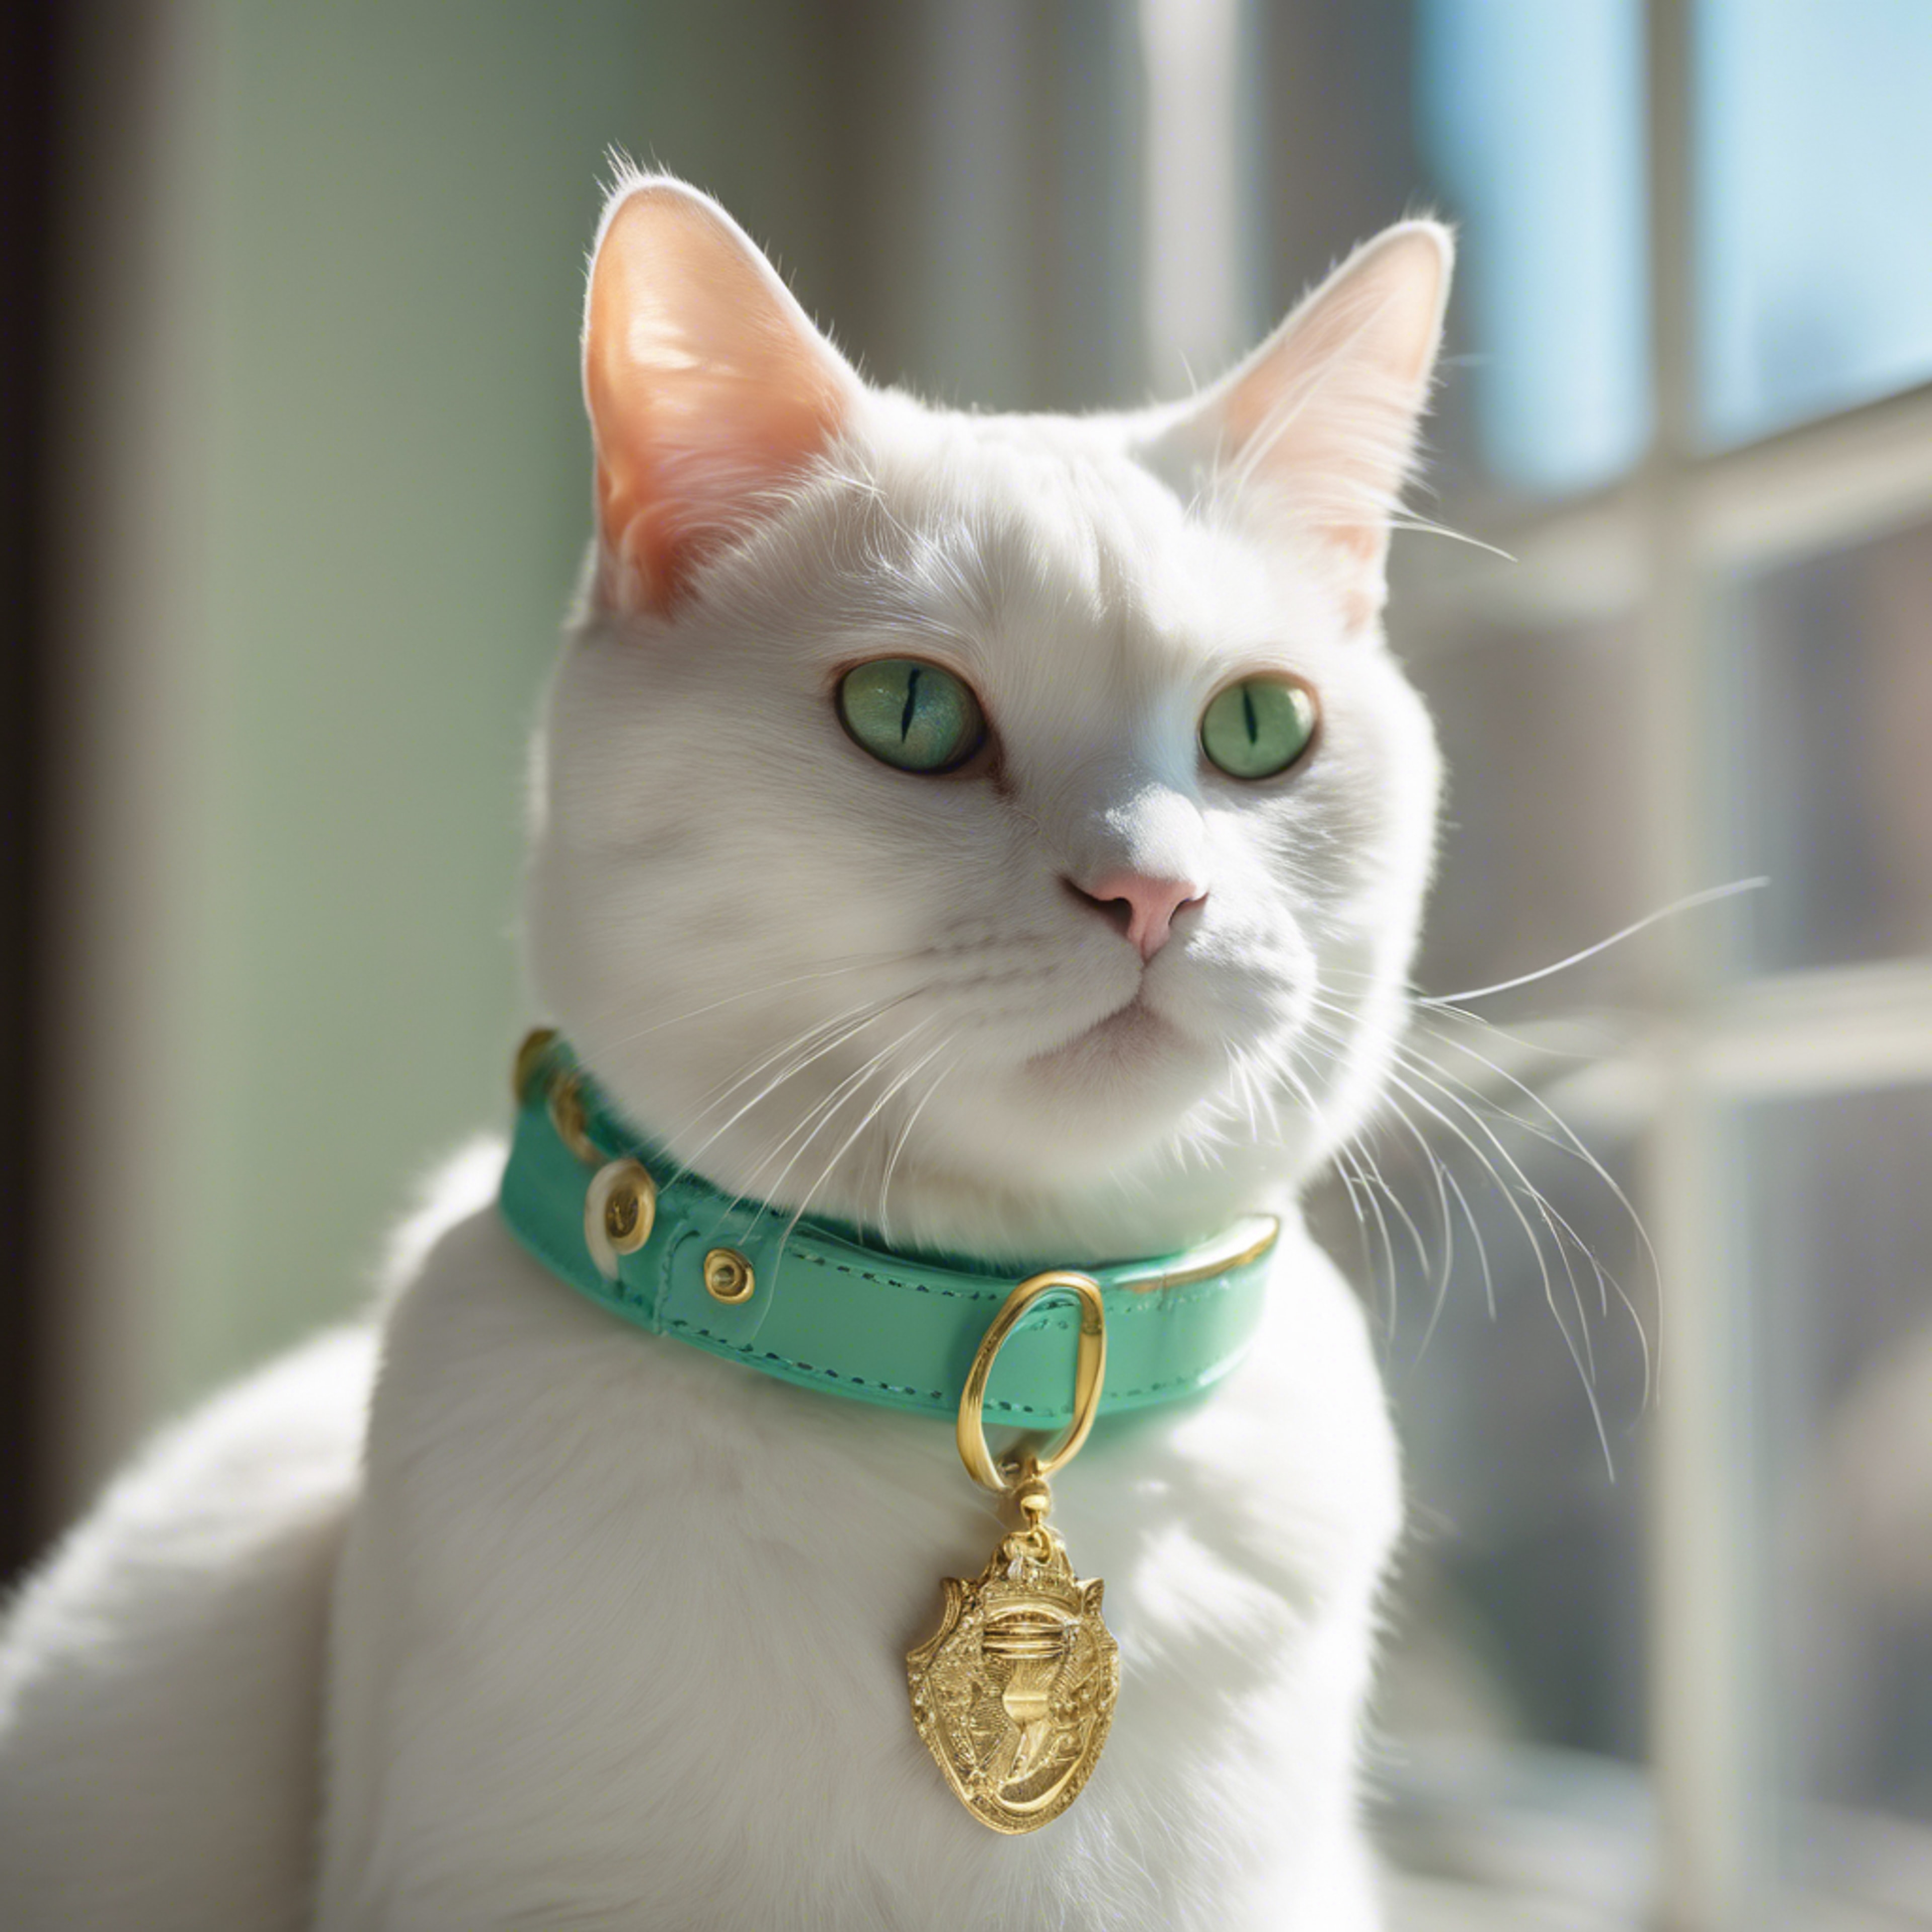 An adorable white cat wearing a preppy mint green collar with a gold buckle sitting in a sunny window. Hintergrund[8de0351476e04873aa5e]